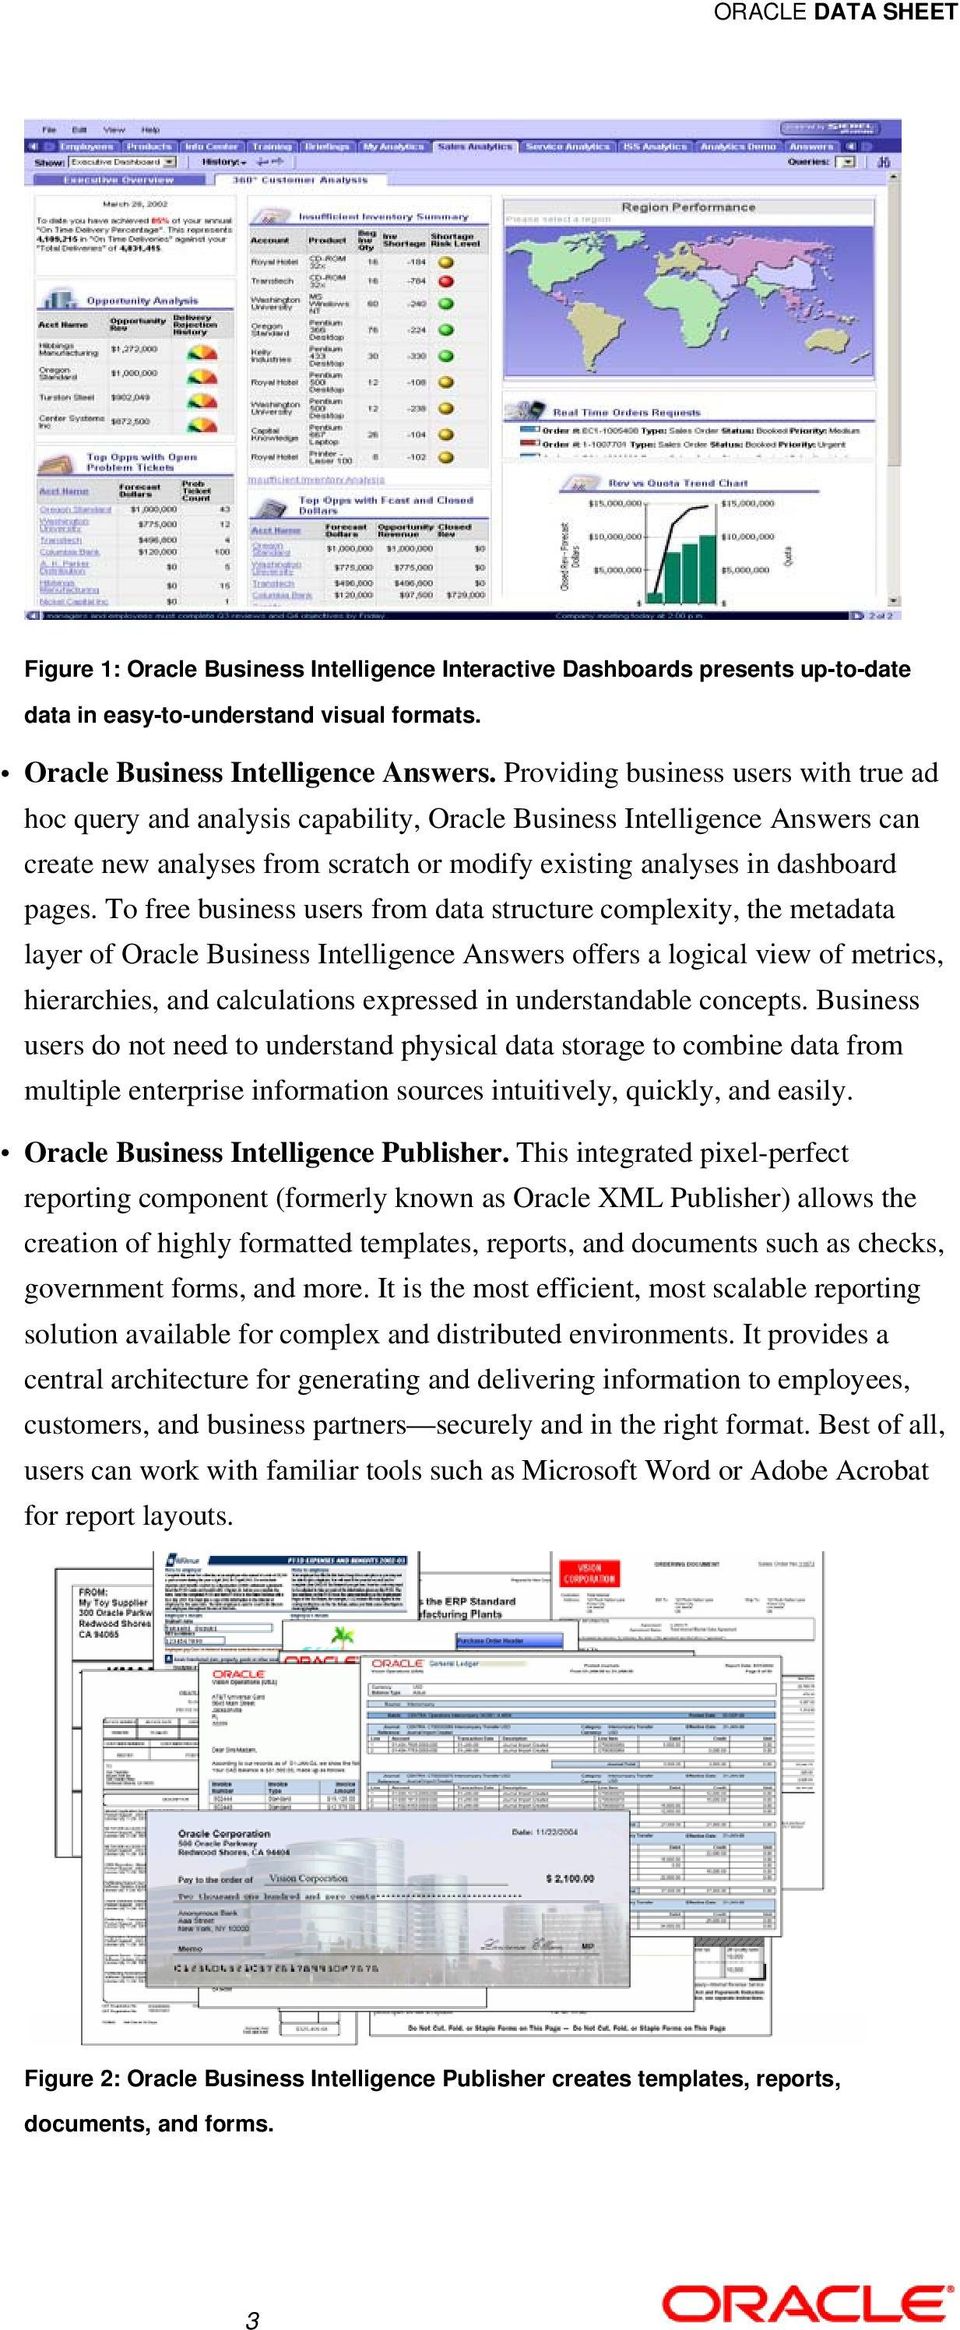 To free business users from data structure complexity, the metadata layer of Oracle Business Intelligence Answers offers a logical view of metrics, hierarchies, and calculations expressed in